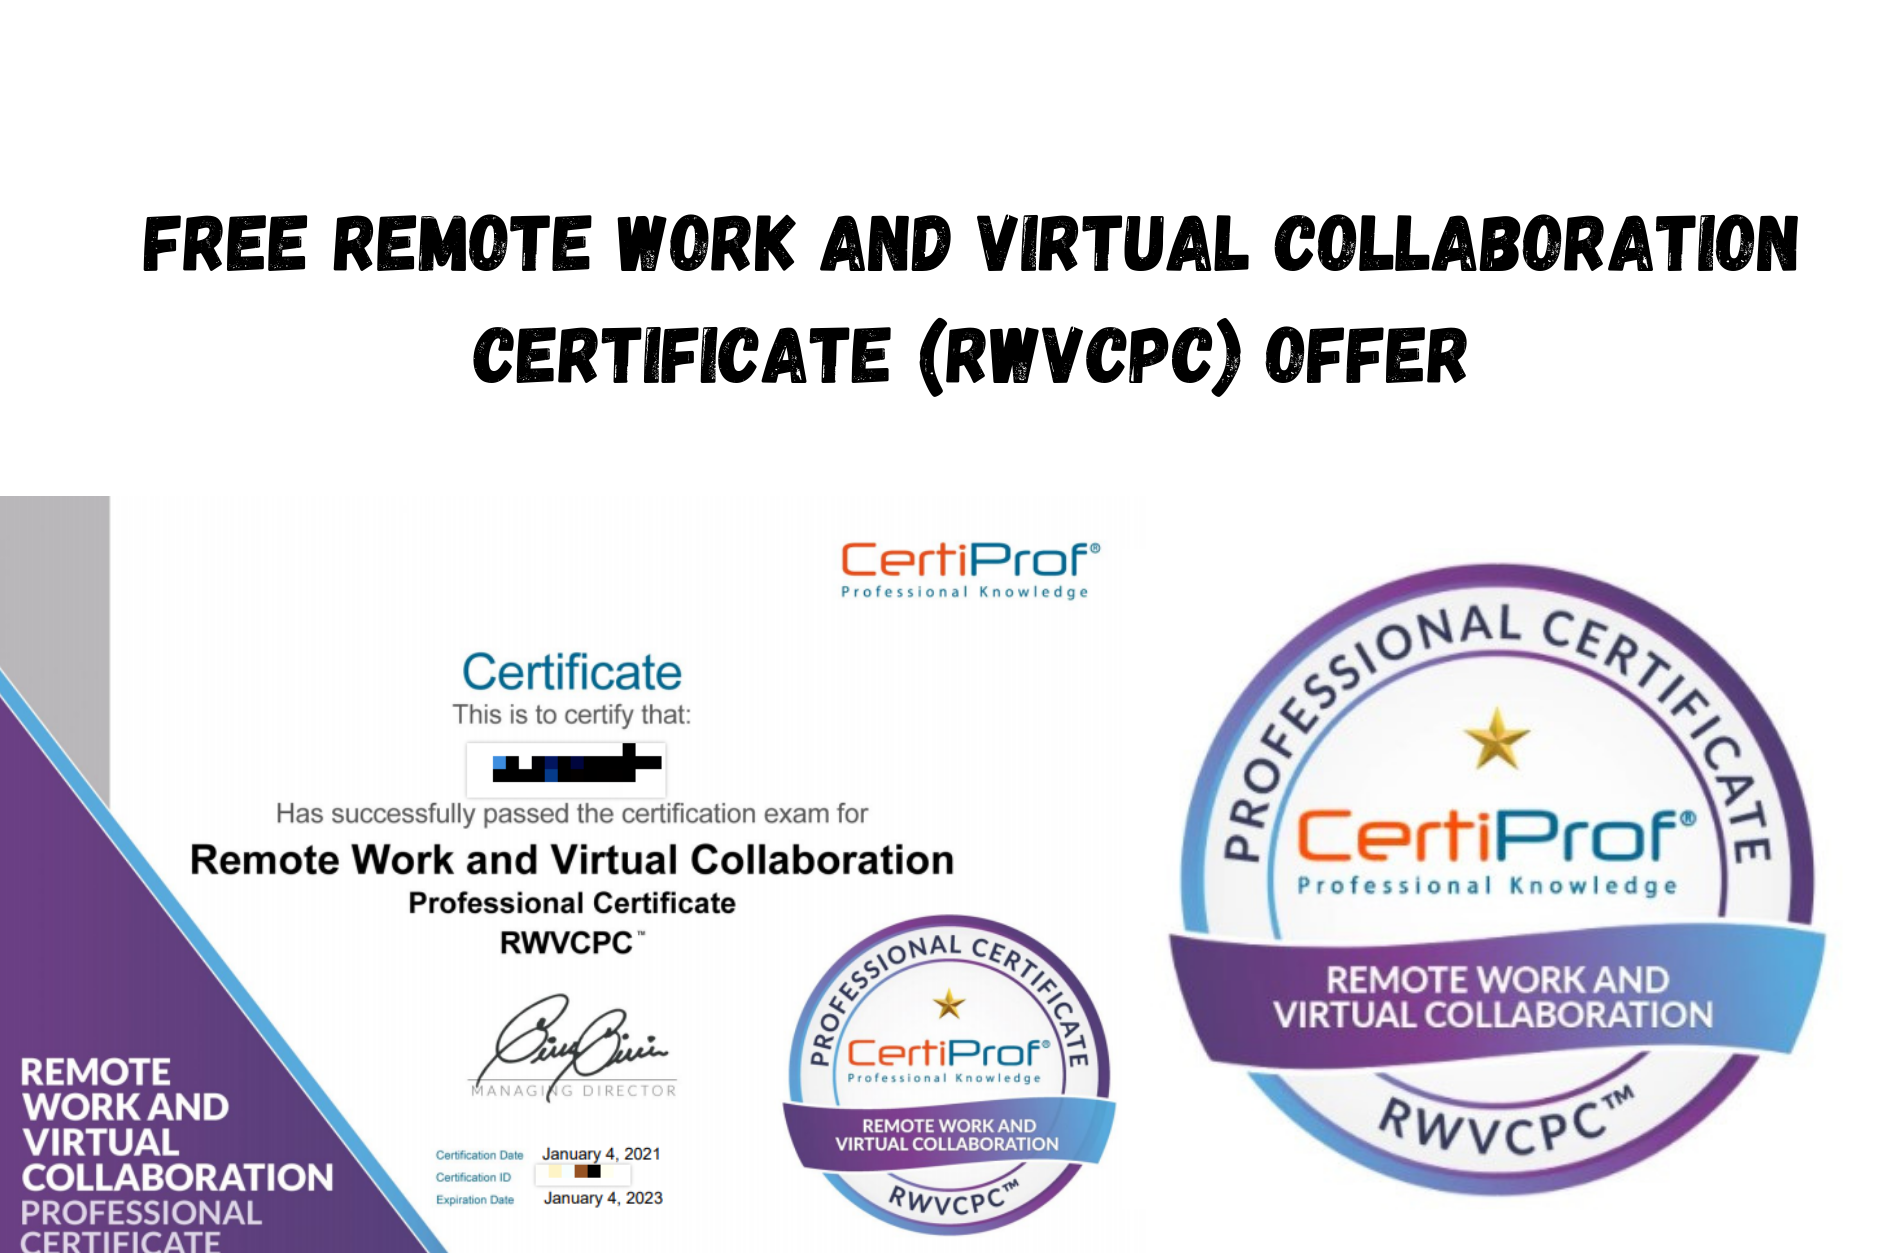 Free Remote Work and Virtual Collaboration Certificate (RWVCPC) offer